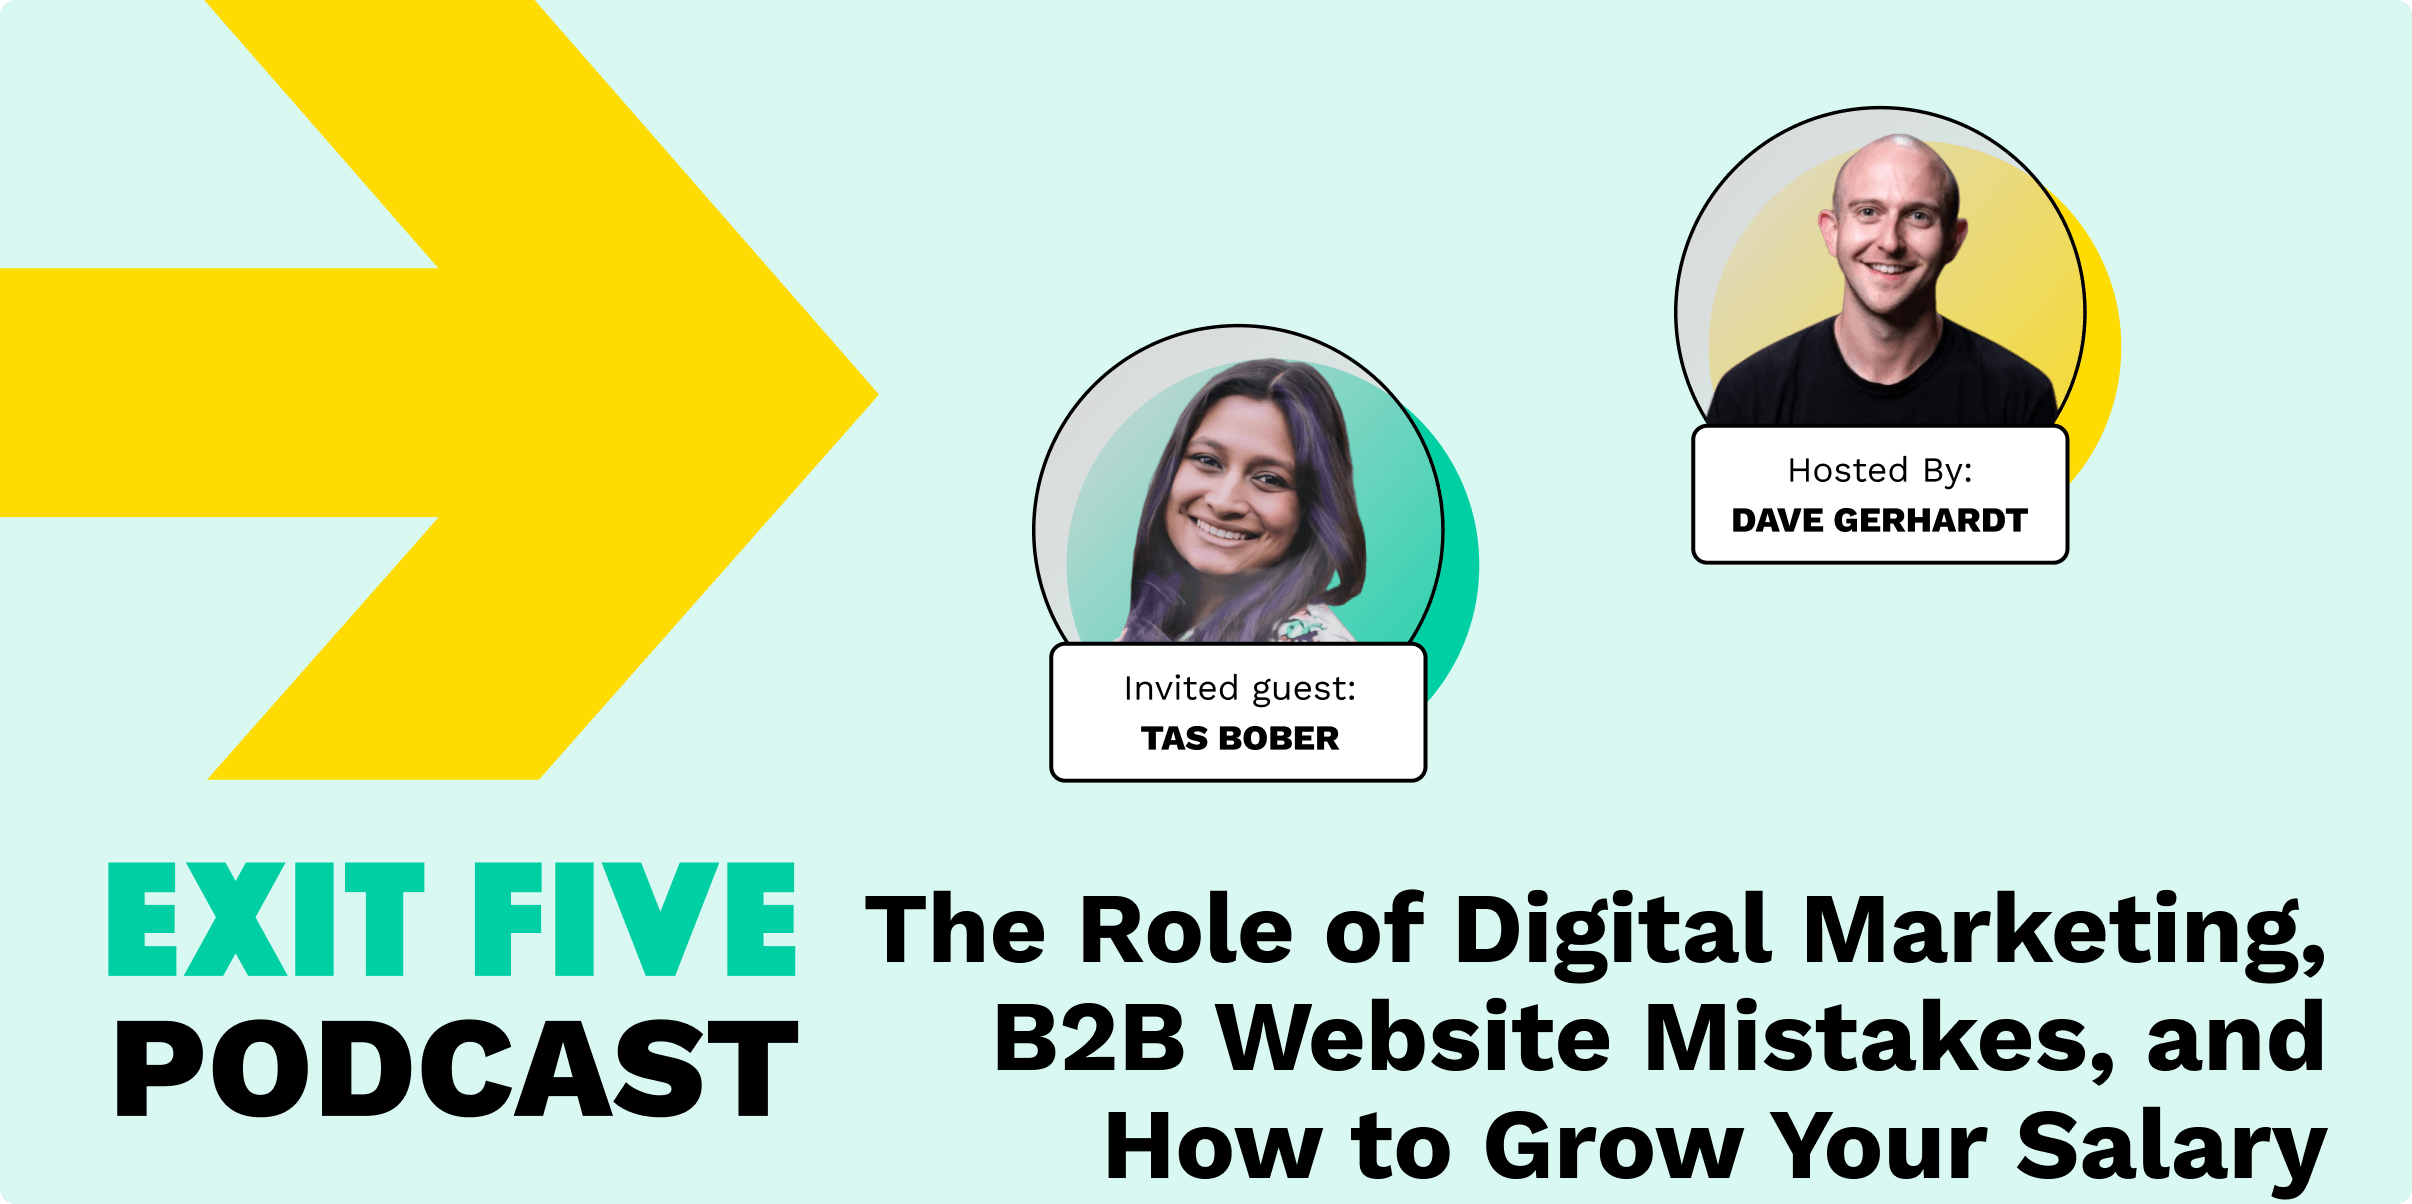 #98: The Role of Digital Marketing, B2B Website Mistakes, and How to Grow Your Salary as an Employee (with Tas Bober)